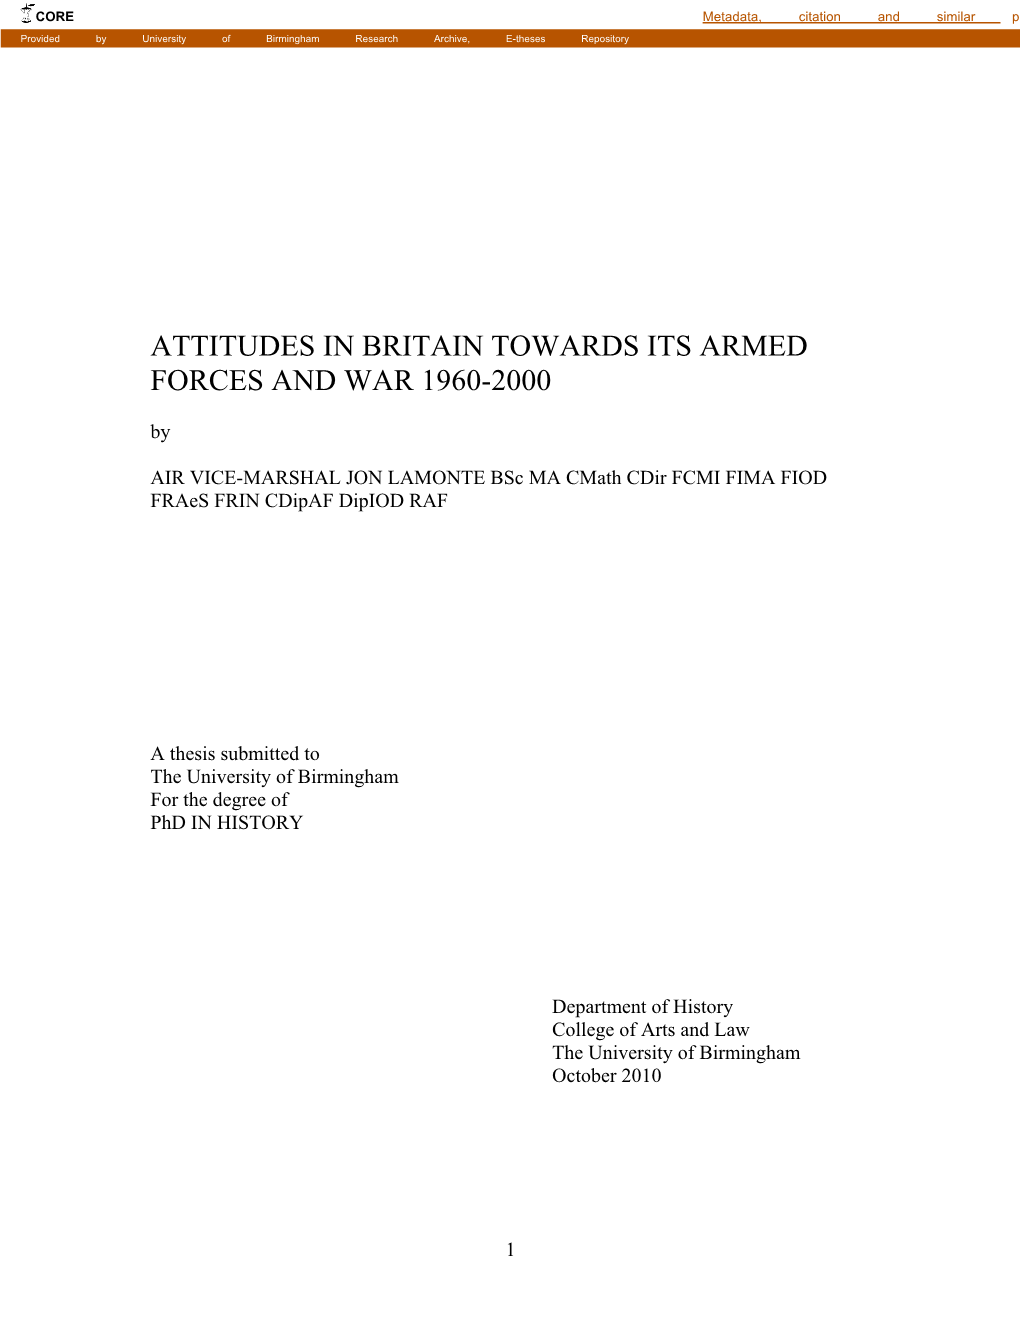 Attitudes in Britain Towards Its Armed Forces and War 1960-2000